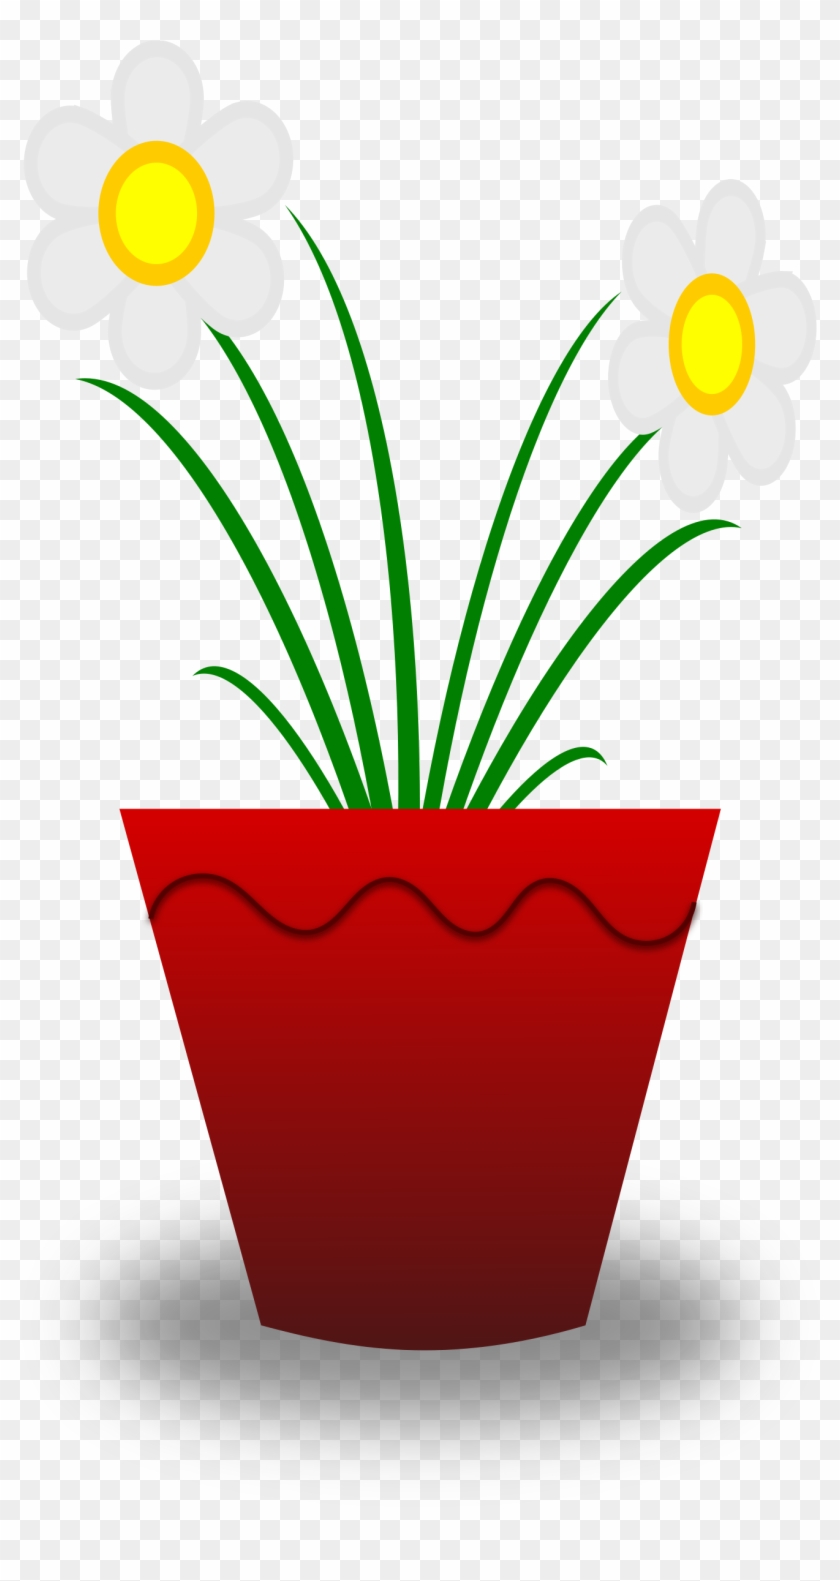 Pot Plant Clipart Big Flower - Flower Growing Animated Gif #95318